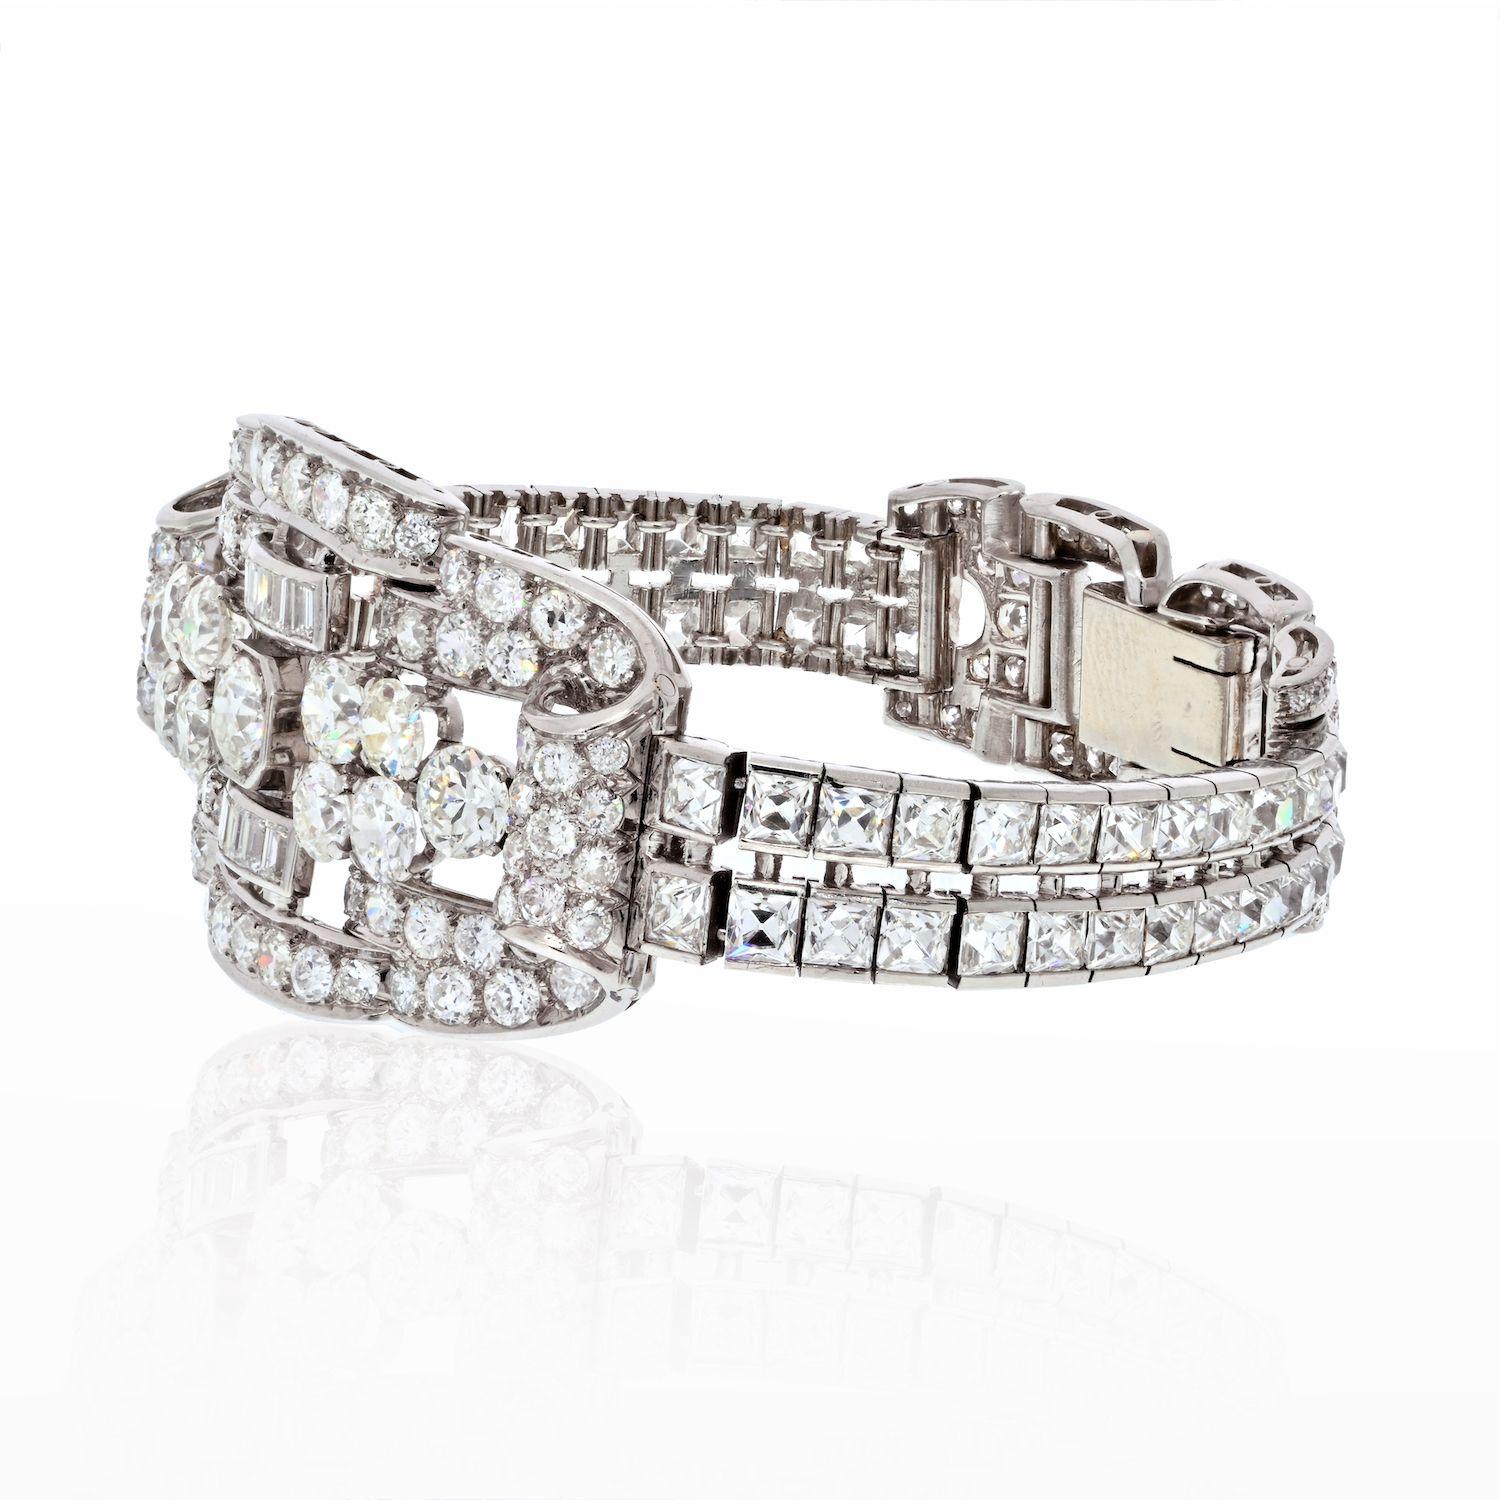 Platinum 35 Carats Diamond Deco Bracelet In Excellent Condition For Sale In New York, NY